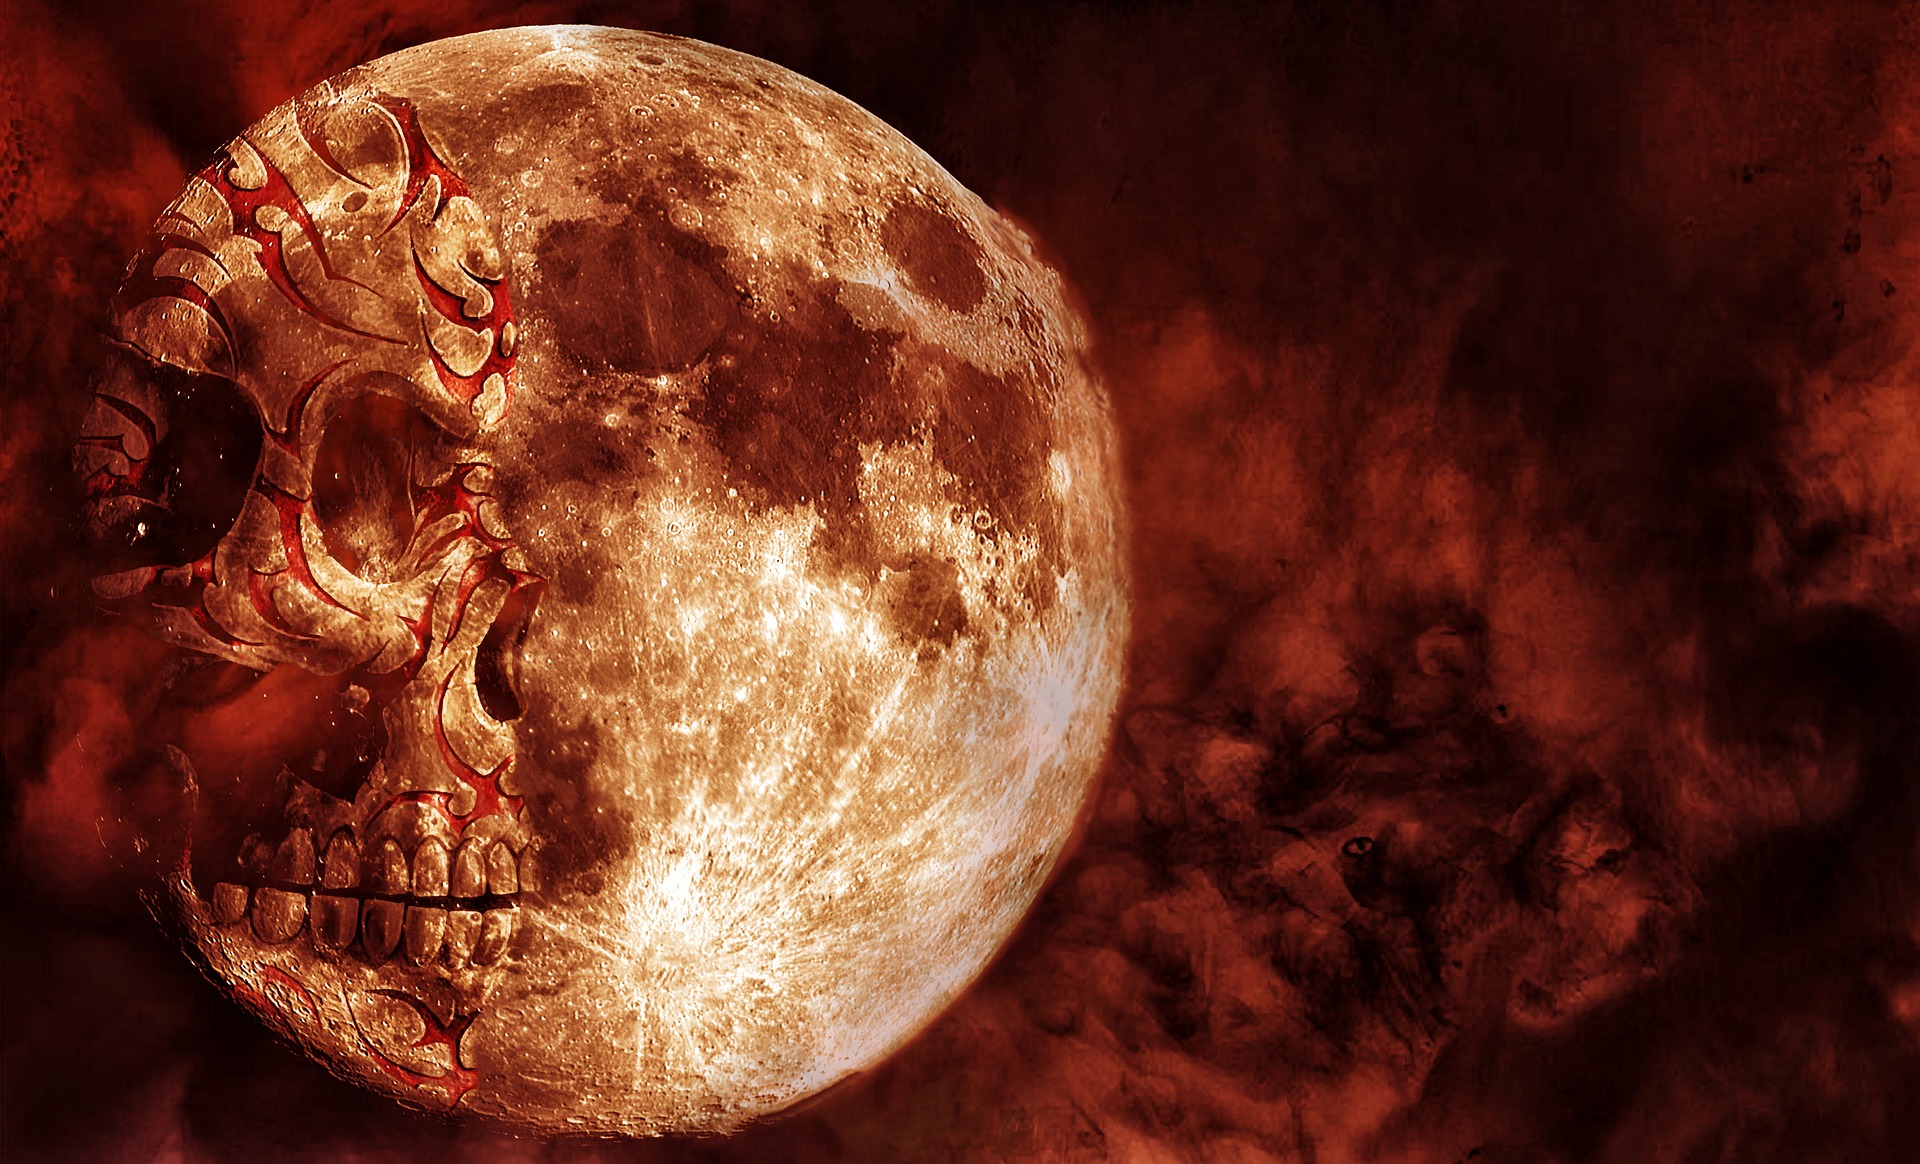 Against a red cloudy night background, on the left half is the red Moon with a skull image on its left